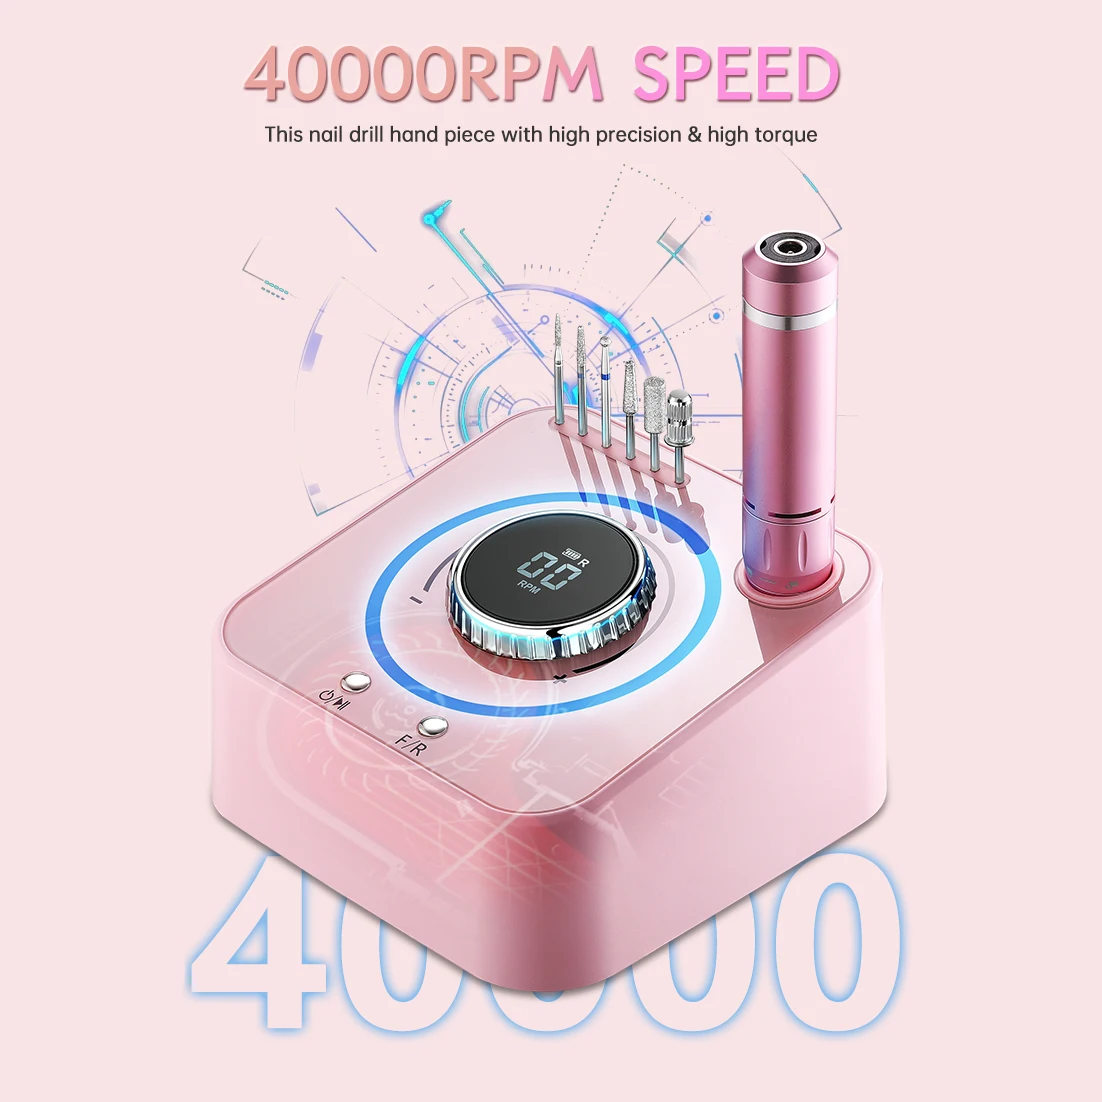 New 40000 RPM Nail Drill Manicure Machine With LCD Display Professional Pedicure Lathe With Memory Function Electric Nail File